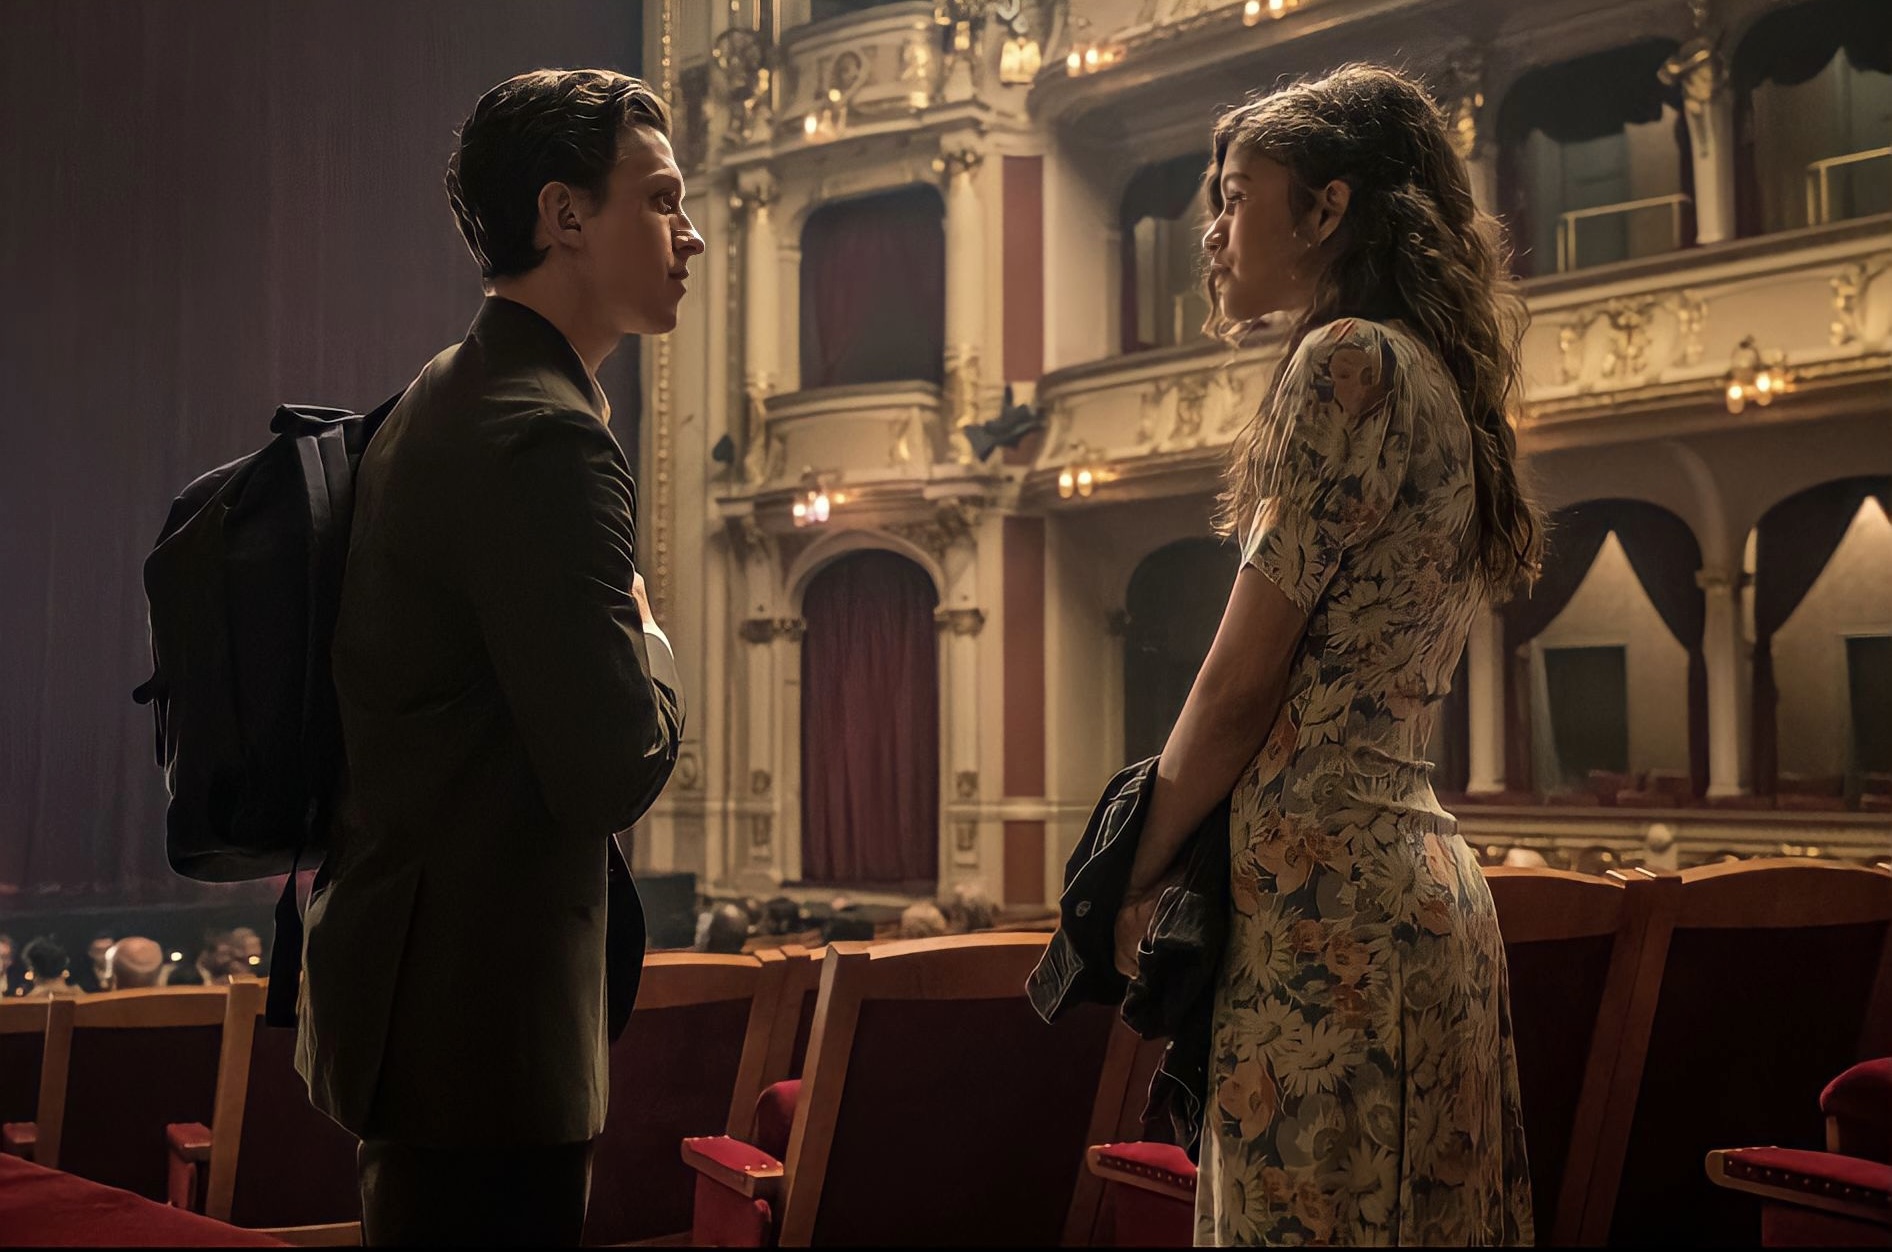 Tom Holland and Zendaya in “Spider-Man: Far from Home”